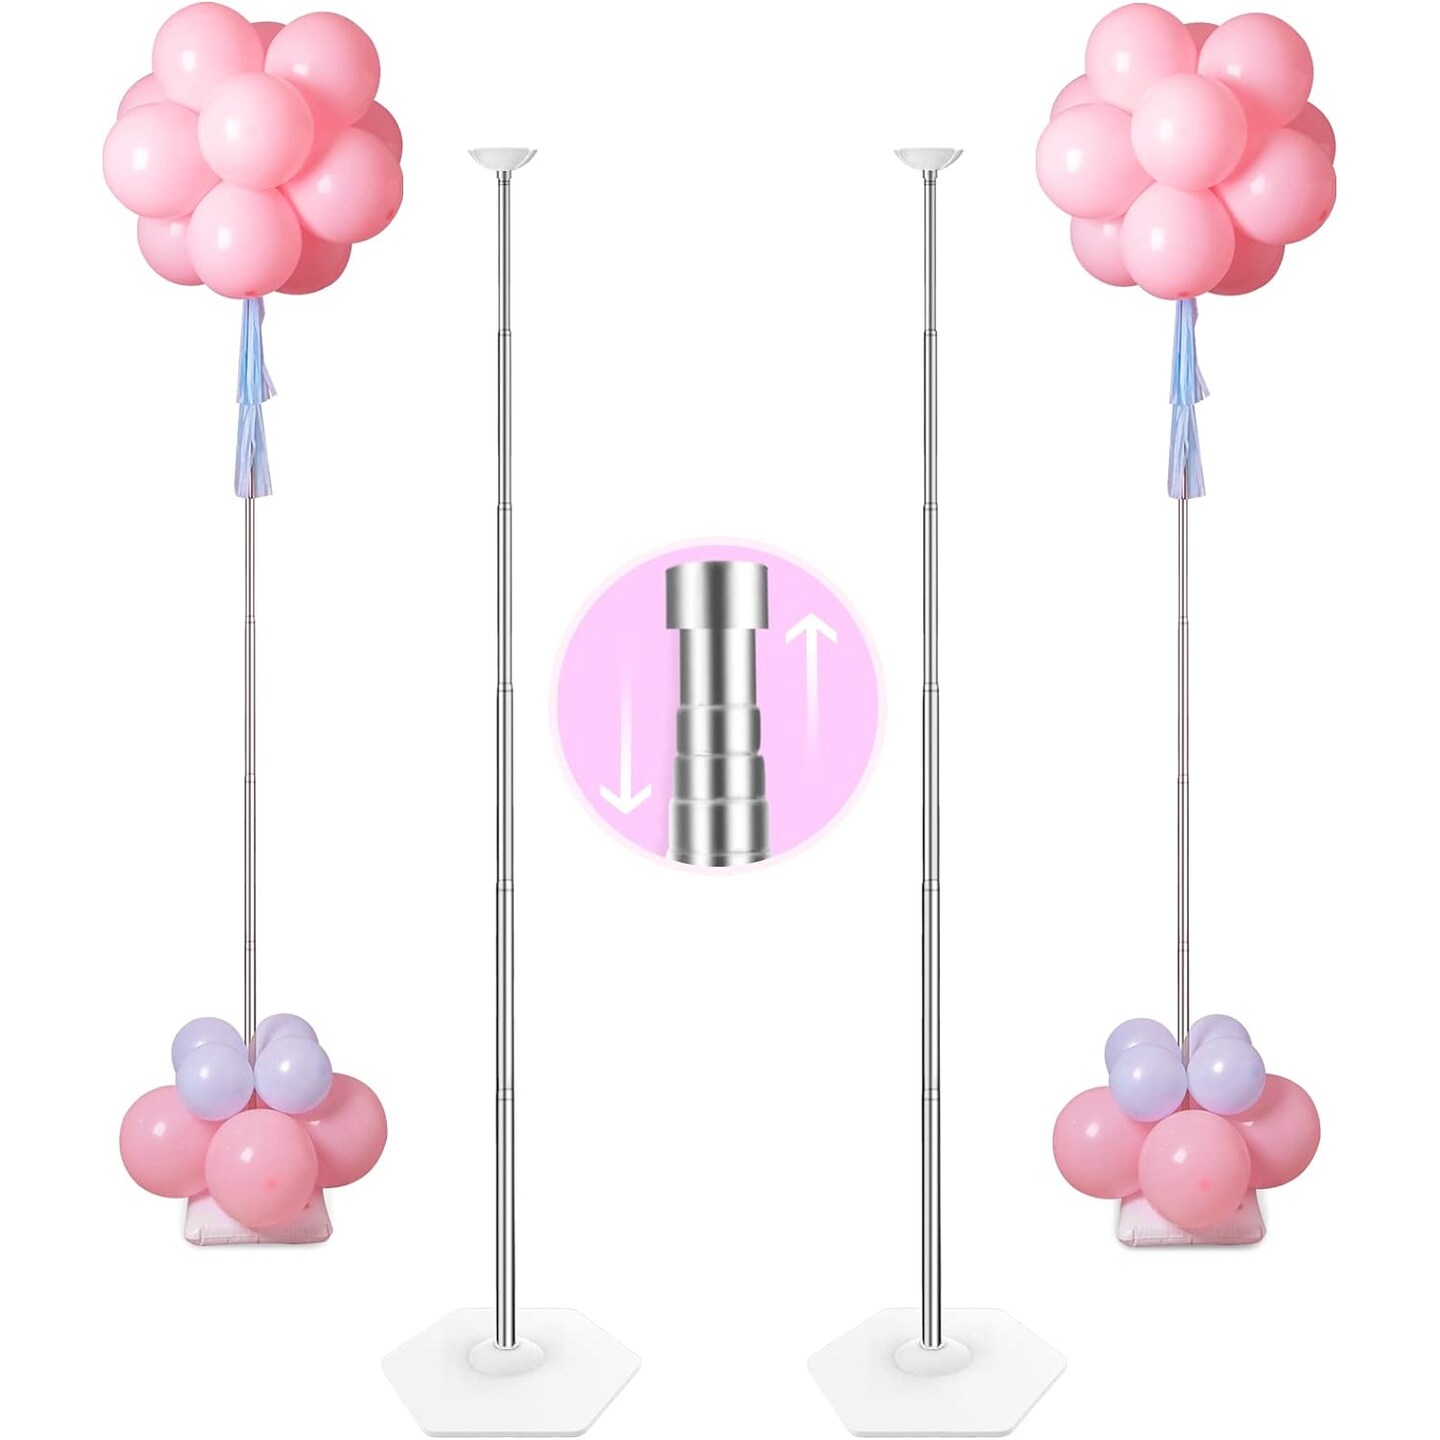 Heavy Duty Metal Balloon Column Stand Kit, Set of 2, 80 Inch Height Adjustable Balloon Tower Holder for Indoor and Outdoor Event and Party Decoration, Easy Assemble and Disassemble